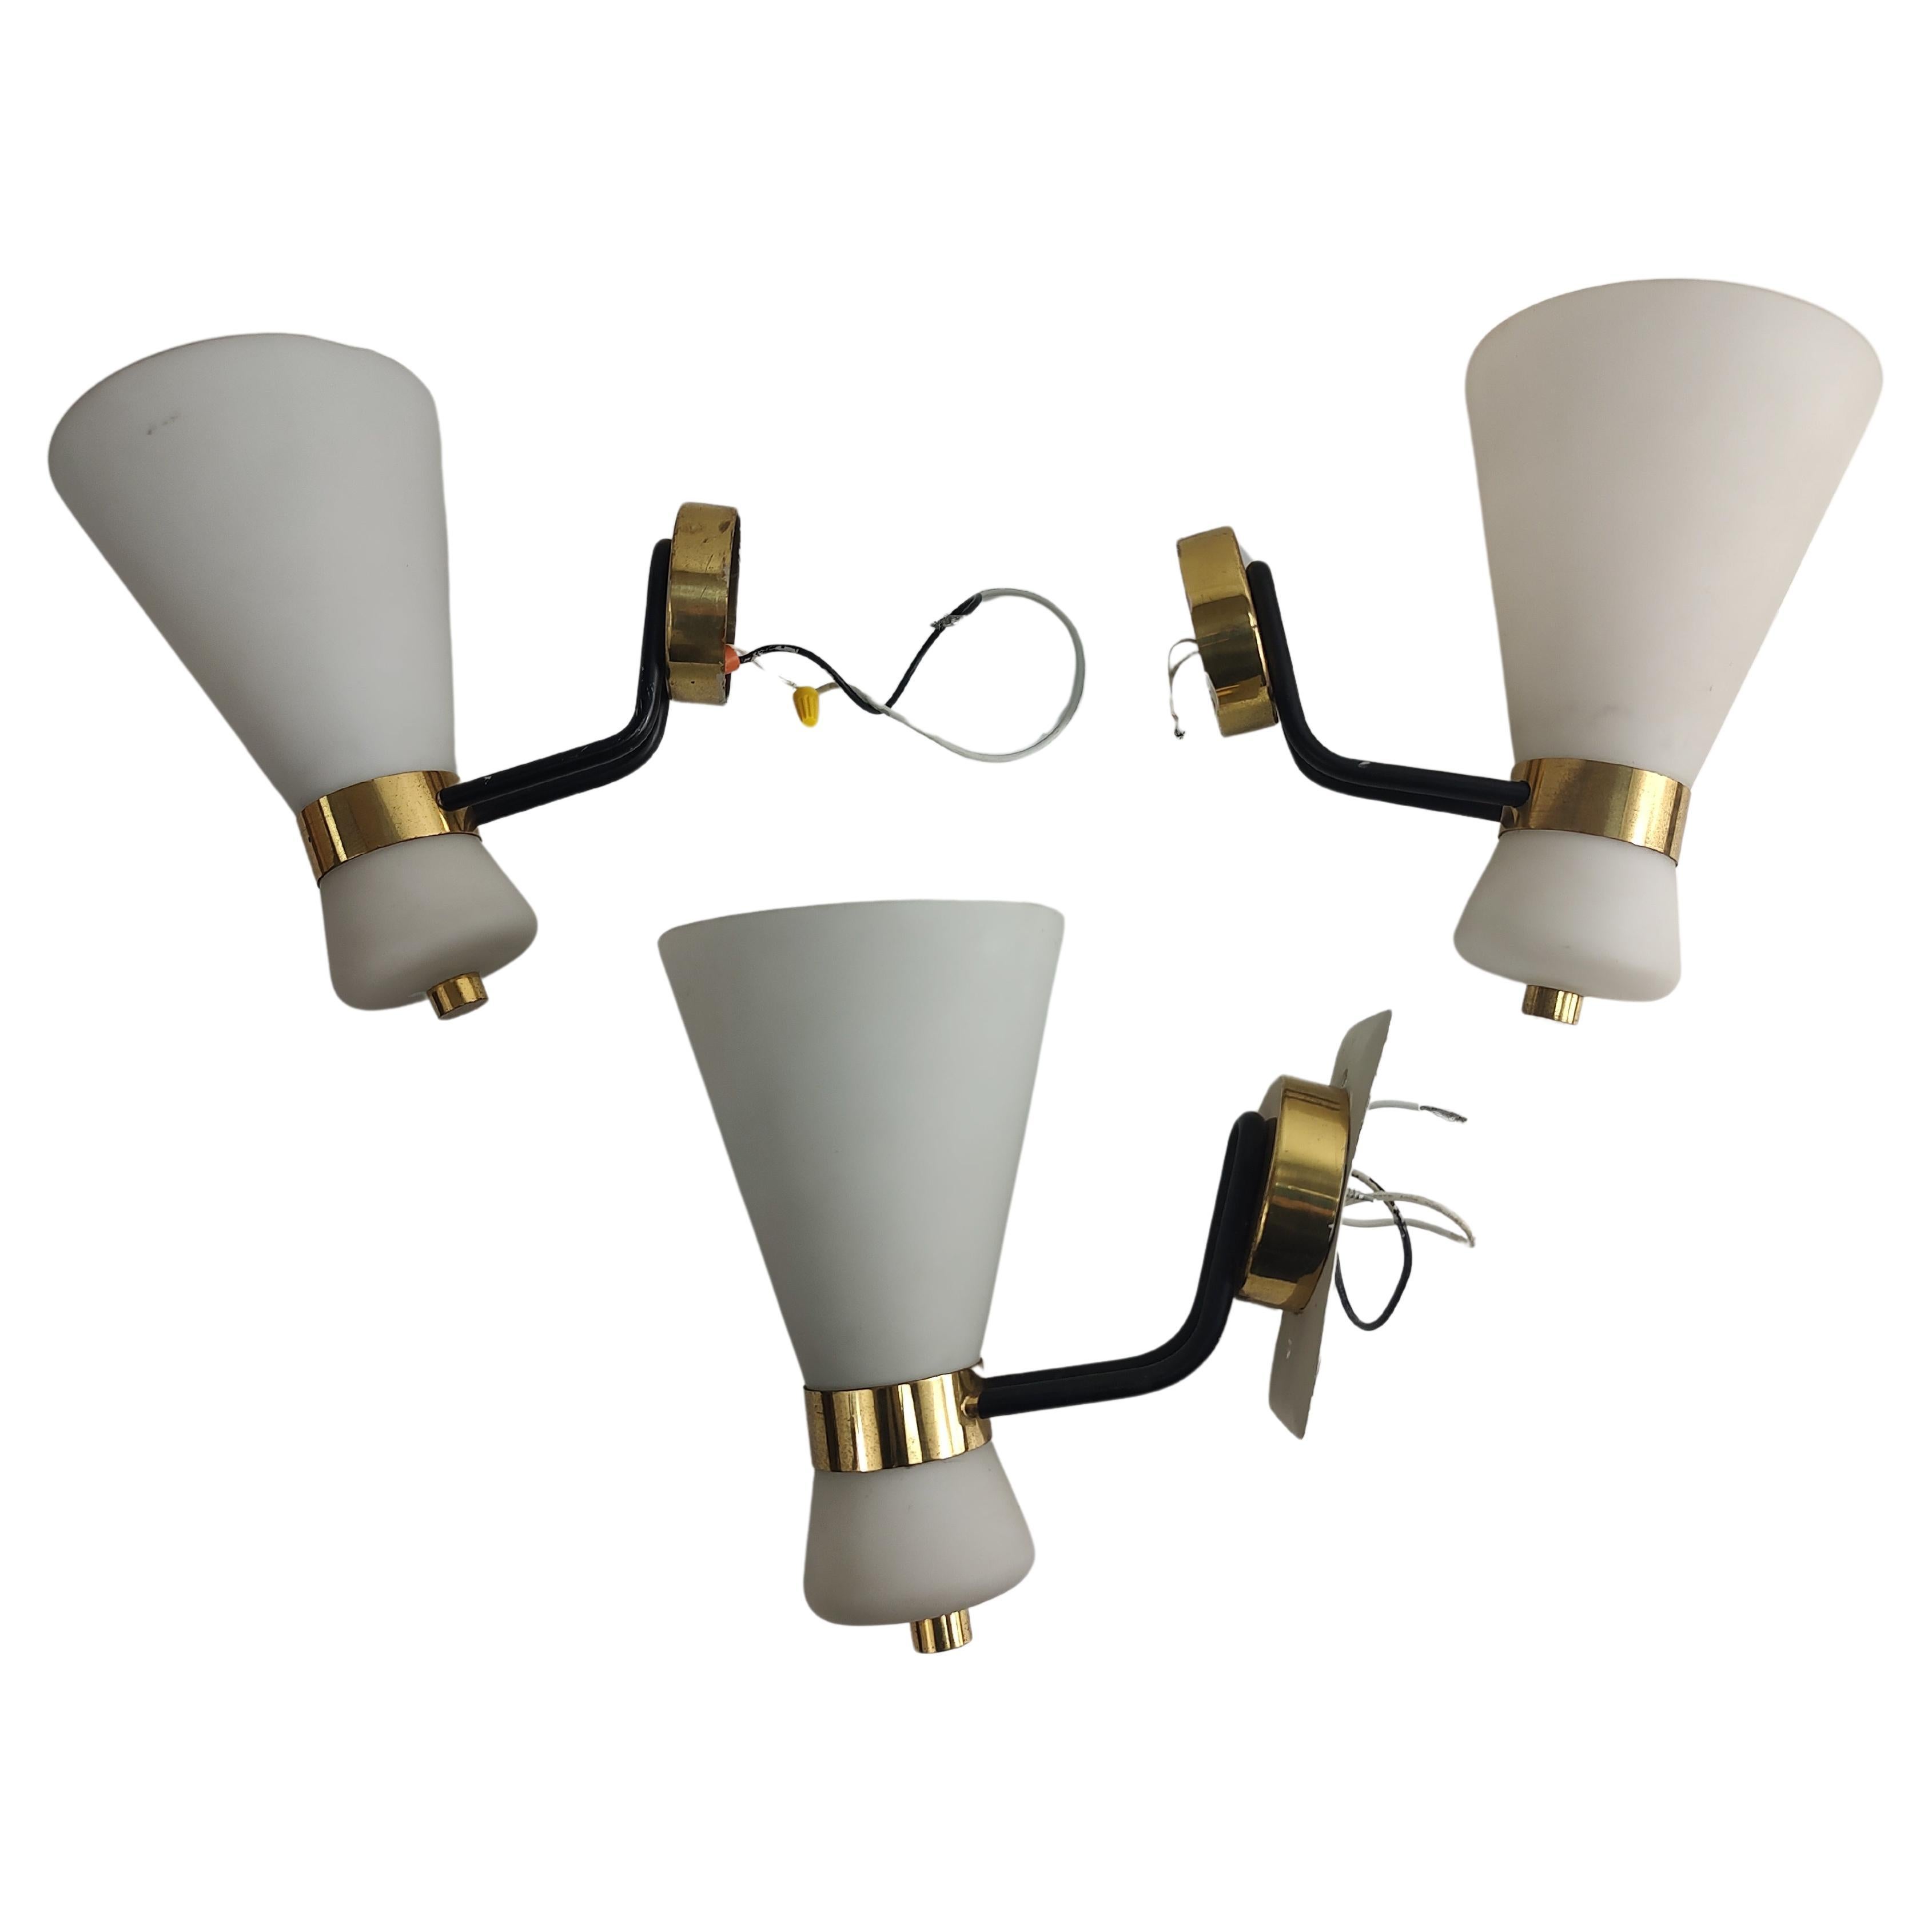 Set of Three Mid Century Modern Wall Sconces by Stilnovo C1958 Italy For Sale